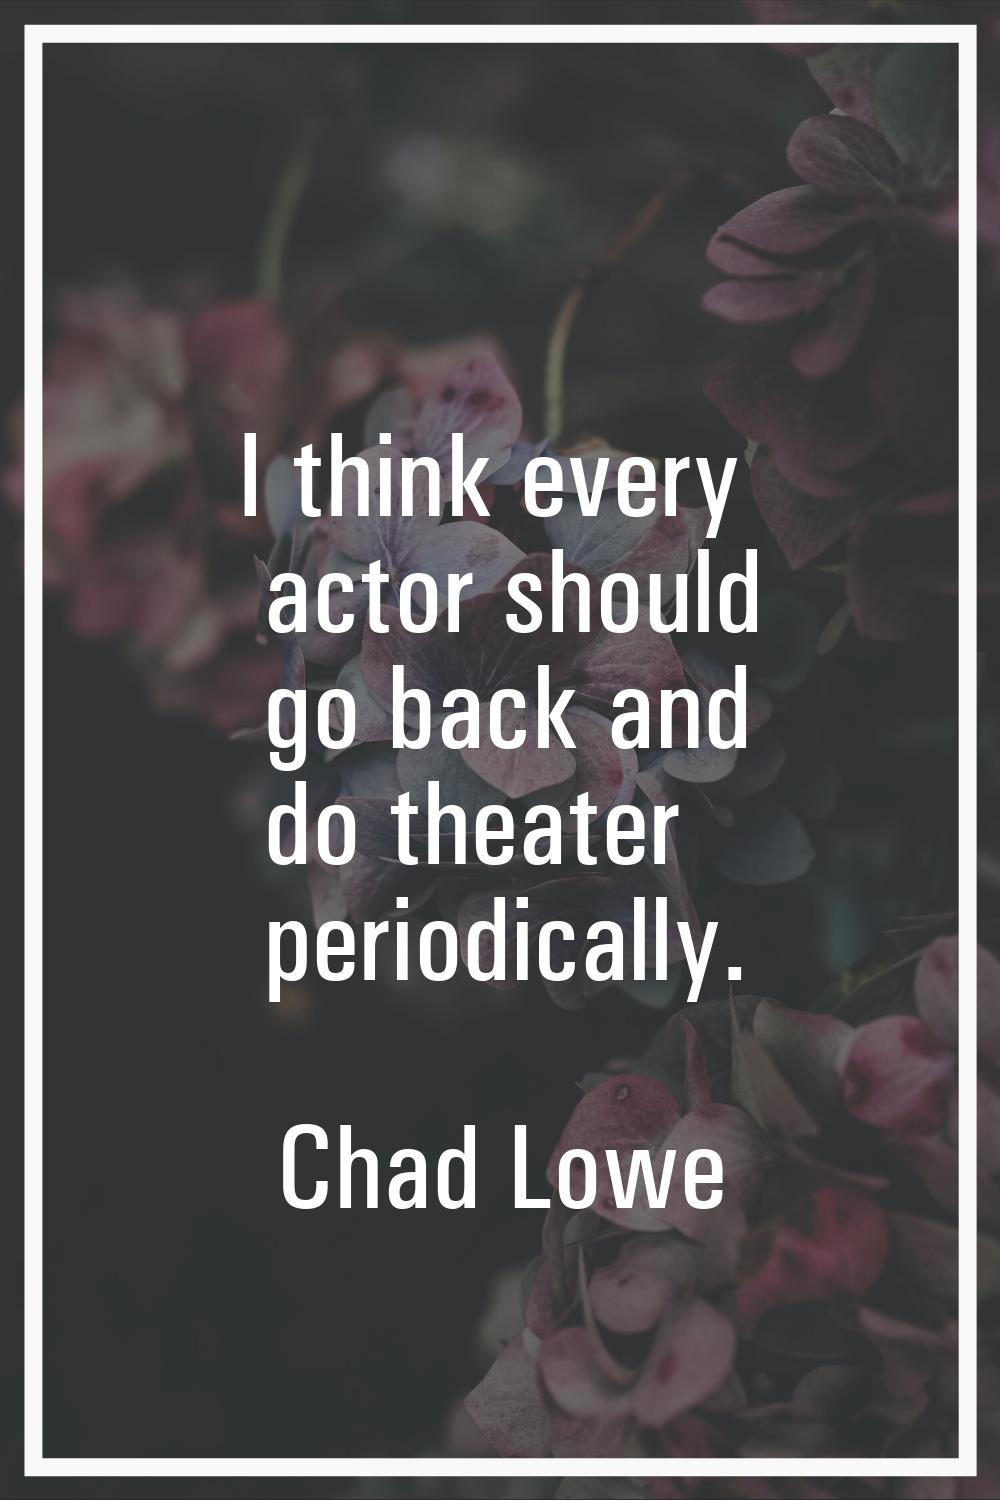 I think every actor should go back and do theater periodically.